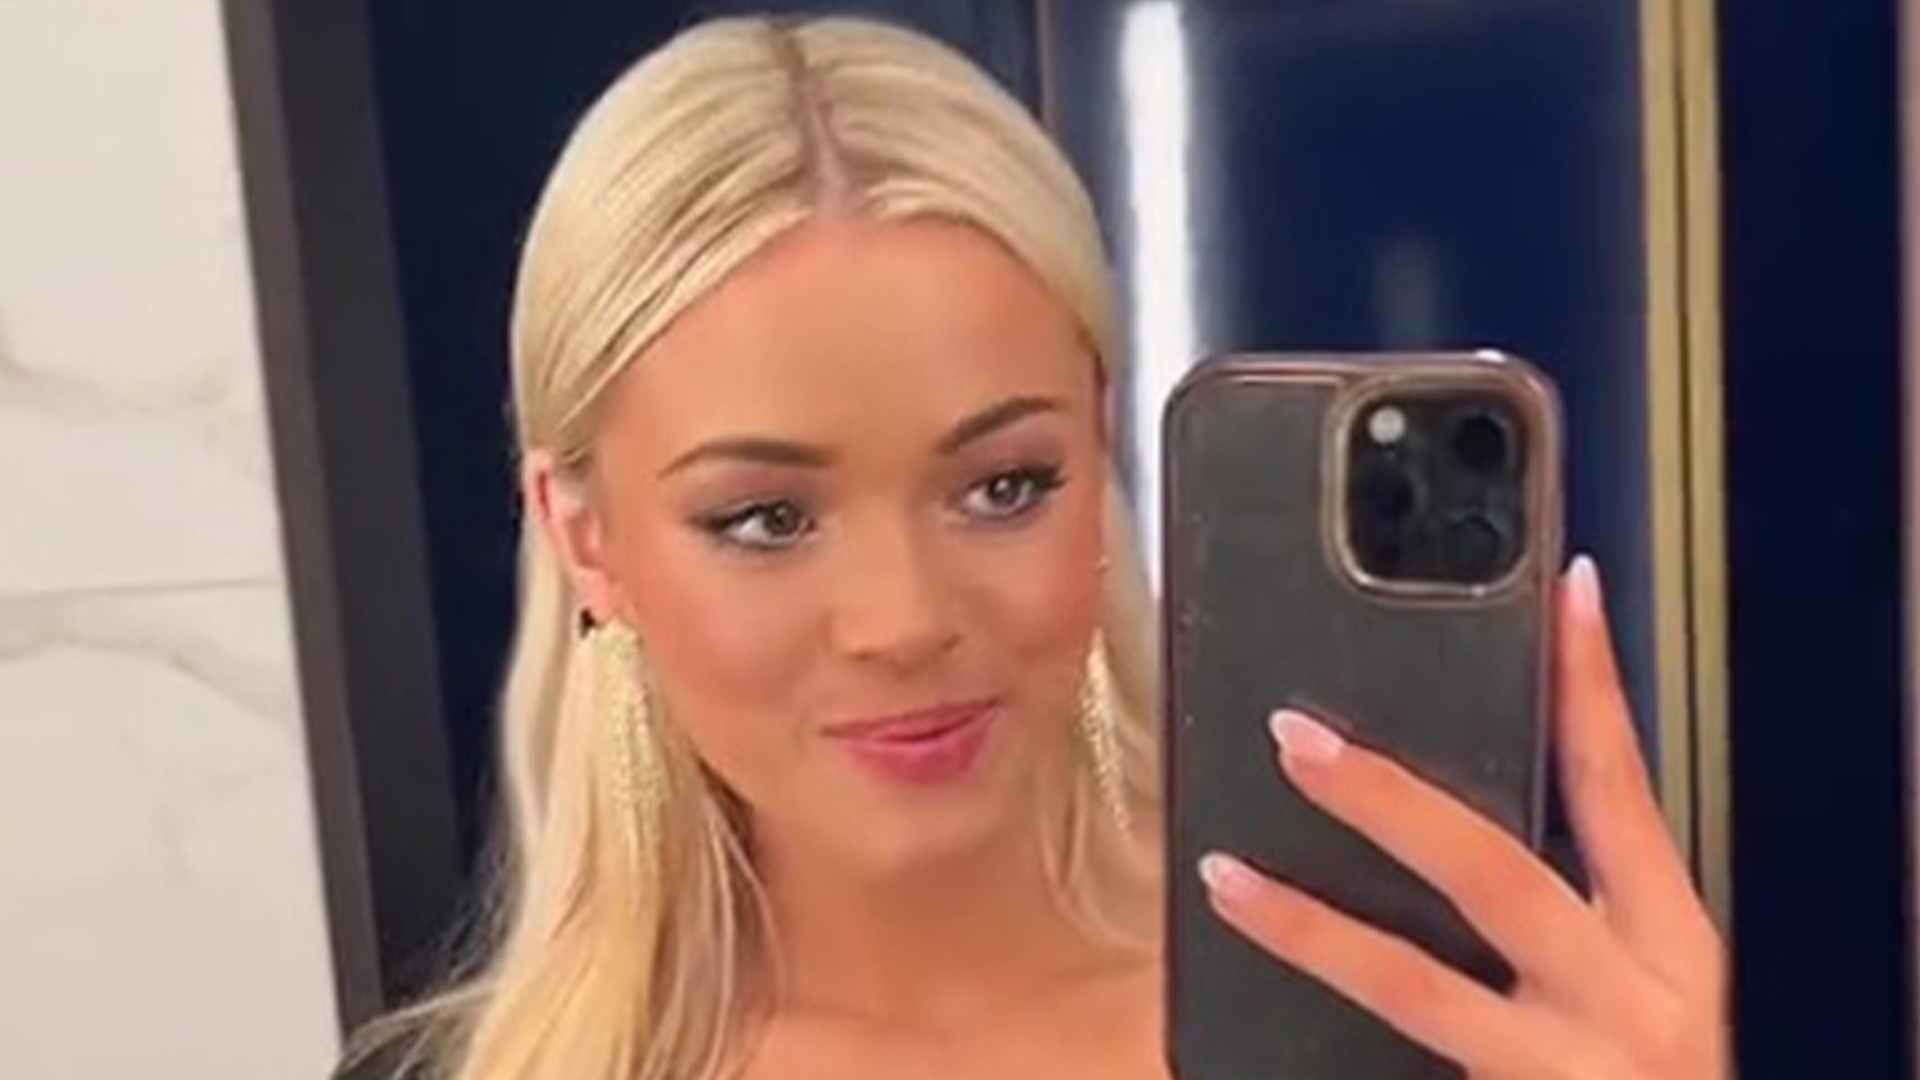 Olivia Dunne labeled ‘phenomenal’ after college gymnastics star wows fans in ‘stunning’ sheer outfit during night out [Video]